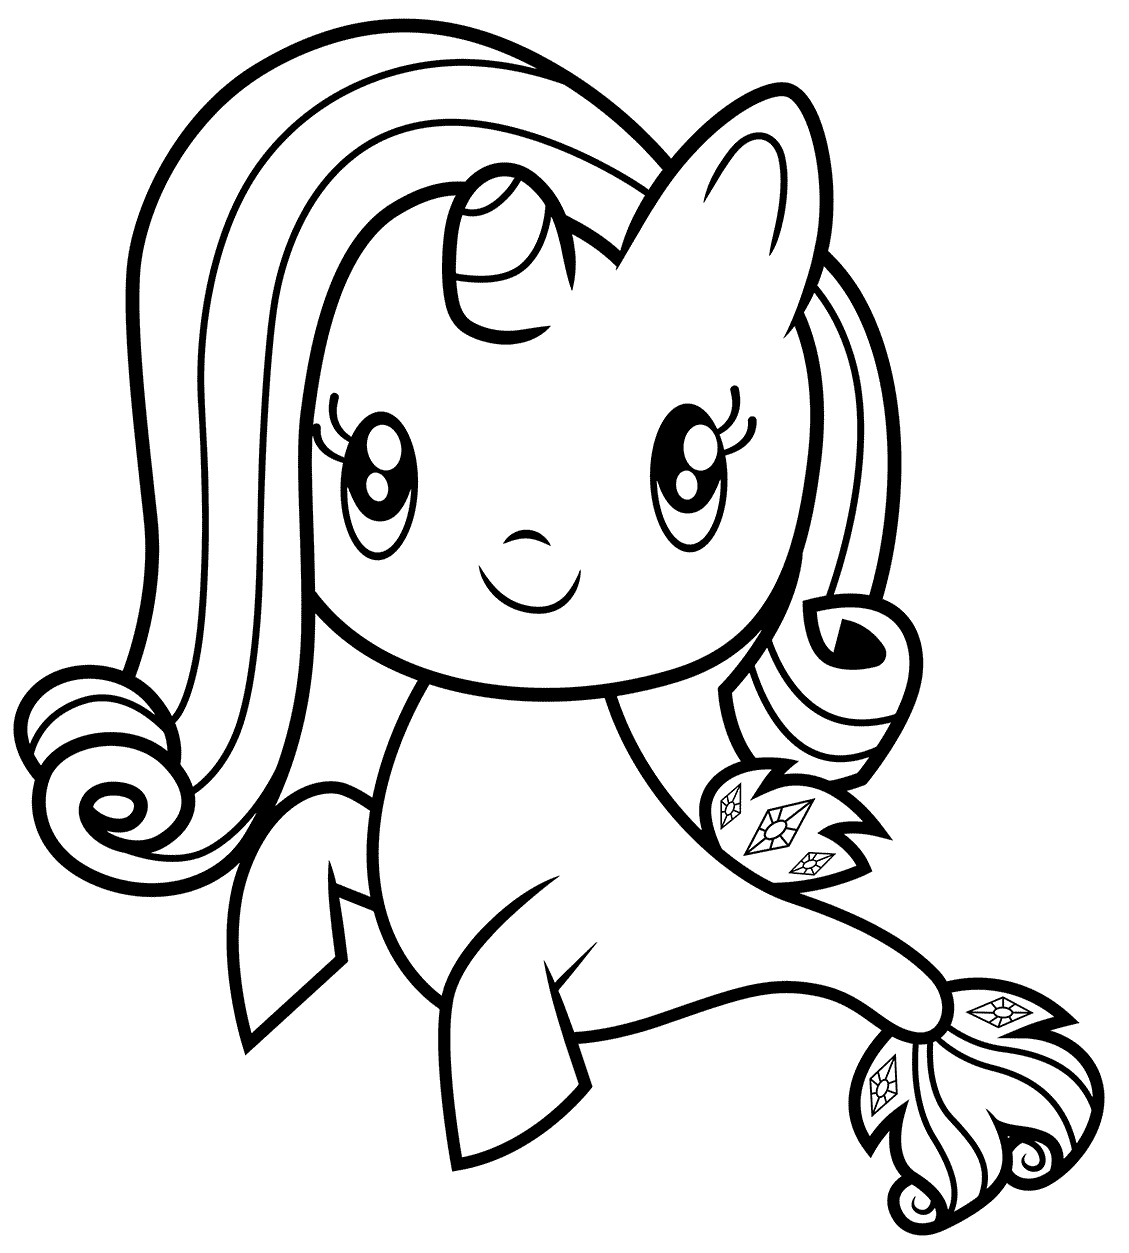 Cutie Mark Crew Rarity Coloring Pages